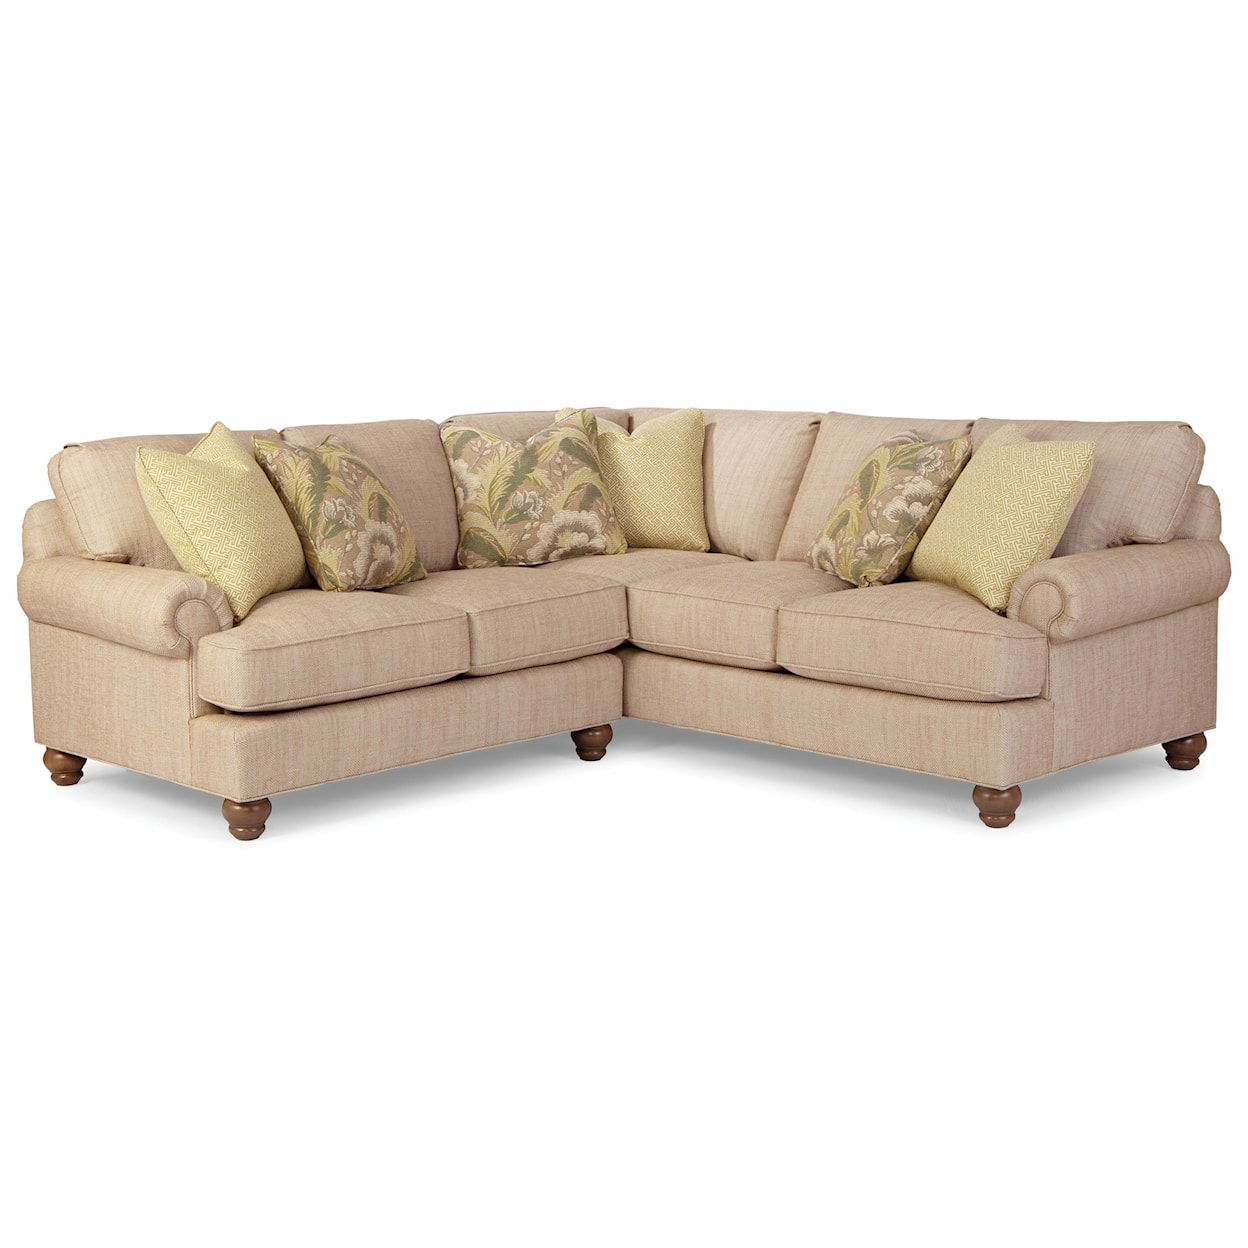 Hickory Craft P9 Custom Upholstery Customizable 2 Pc Sectional Sofa w/ LAF Love